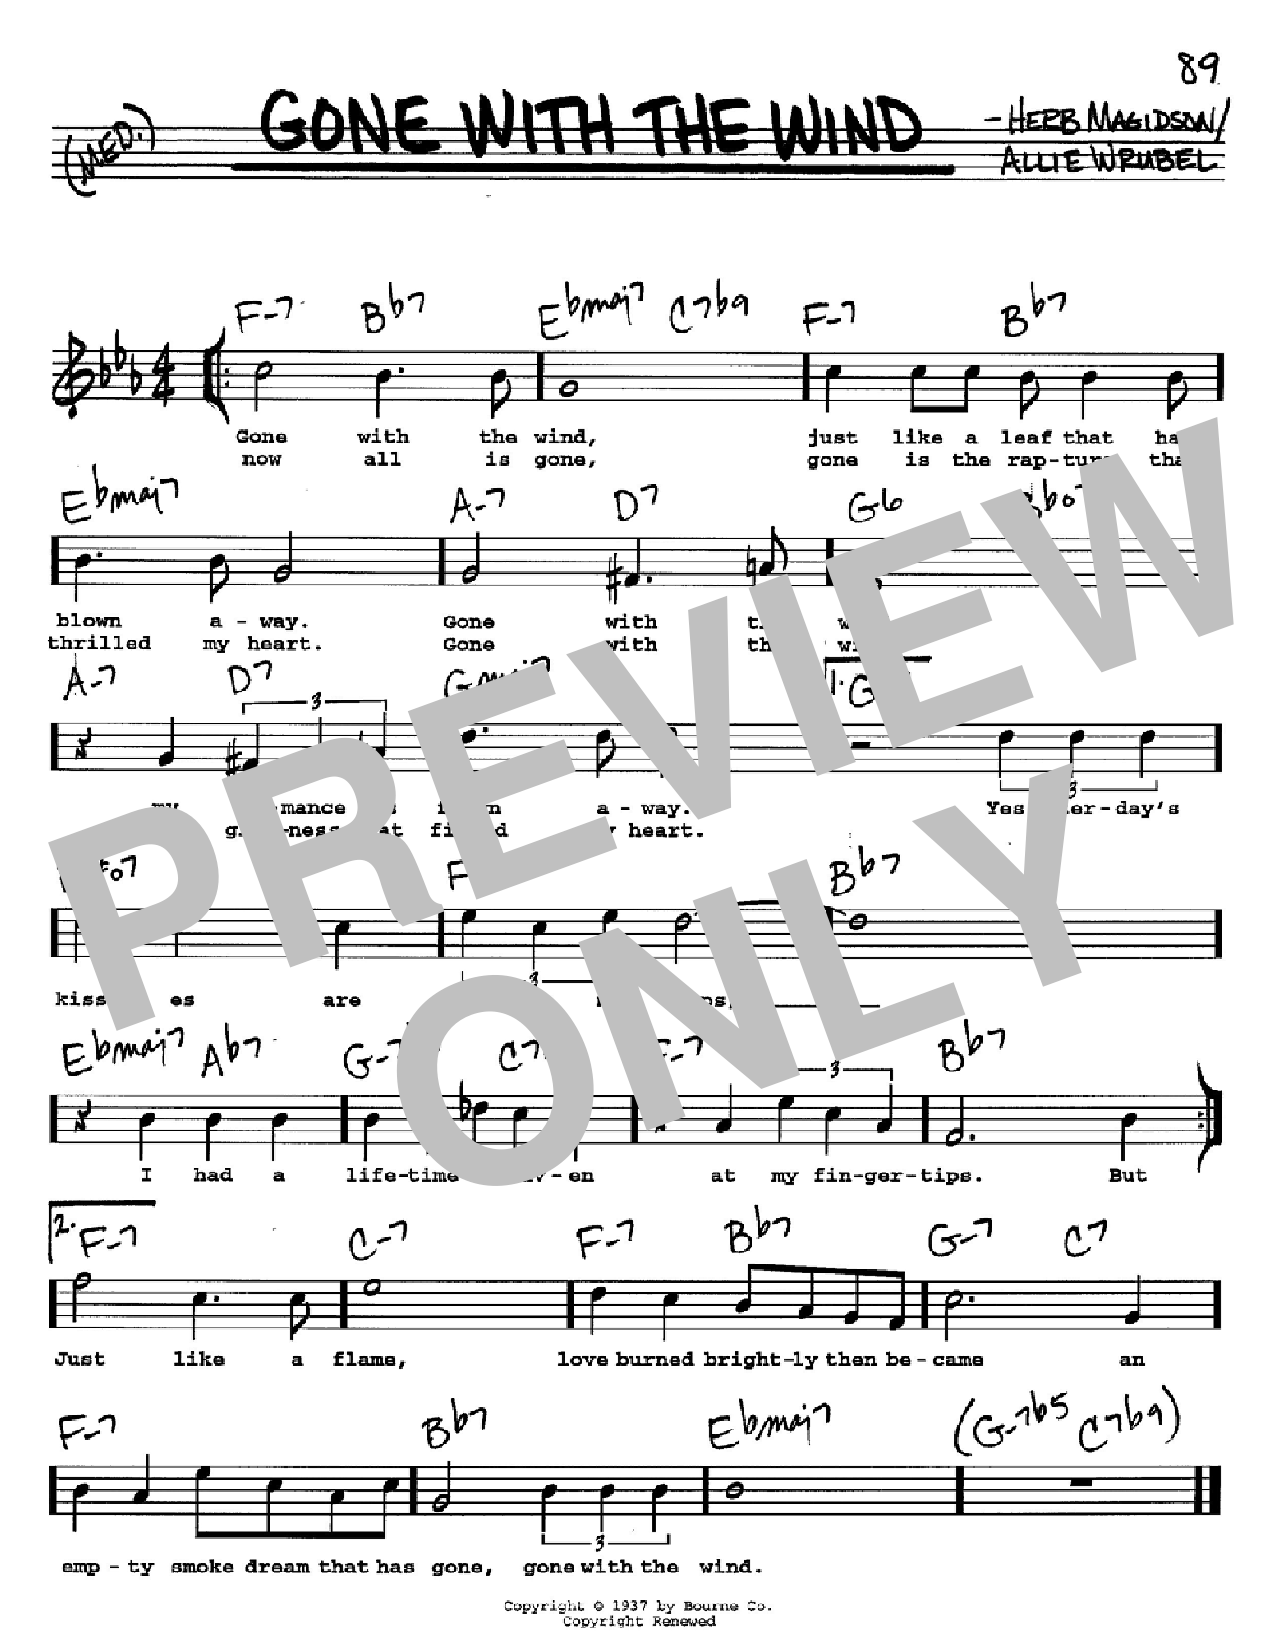 Download Herb Magidson Gone With The Wind Sheet Music